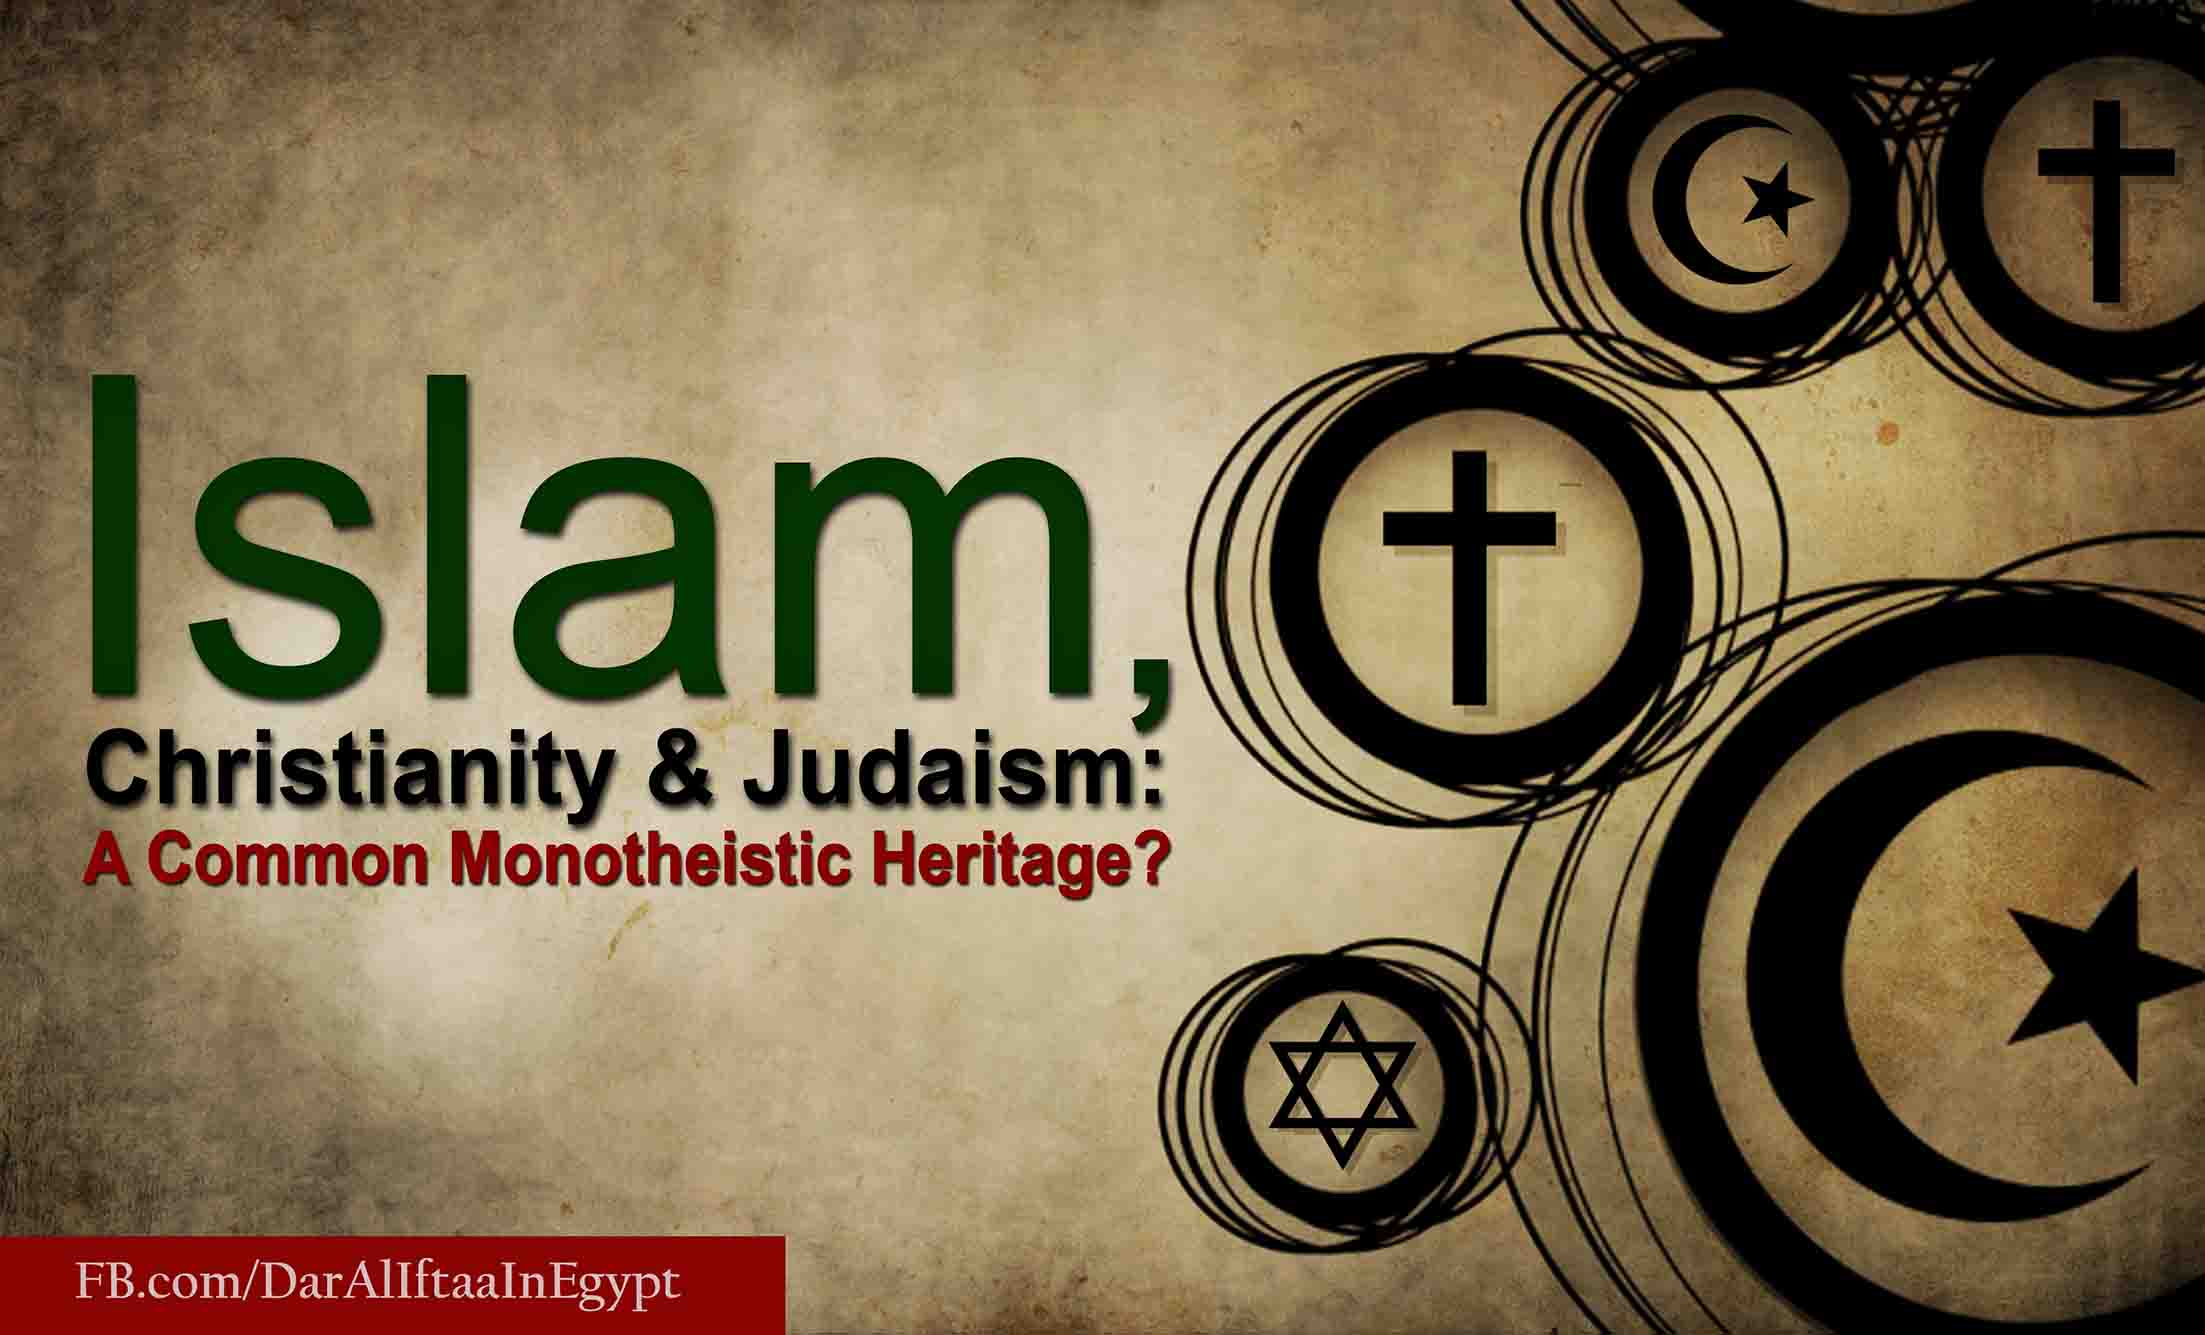 Islam, Christianity & Judaism: a Common Monotheistic Heritage?